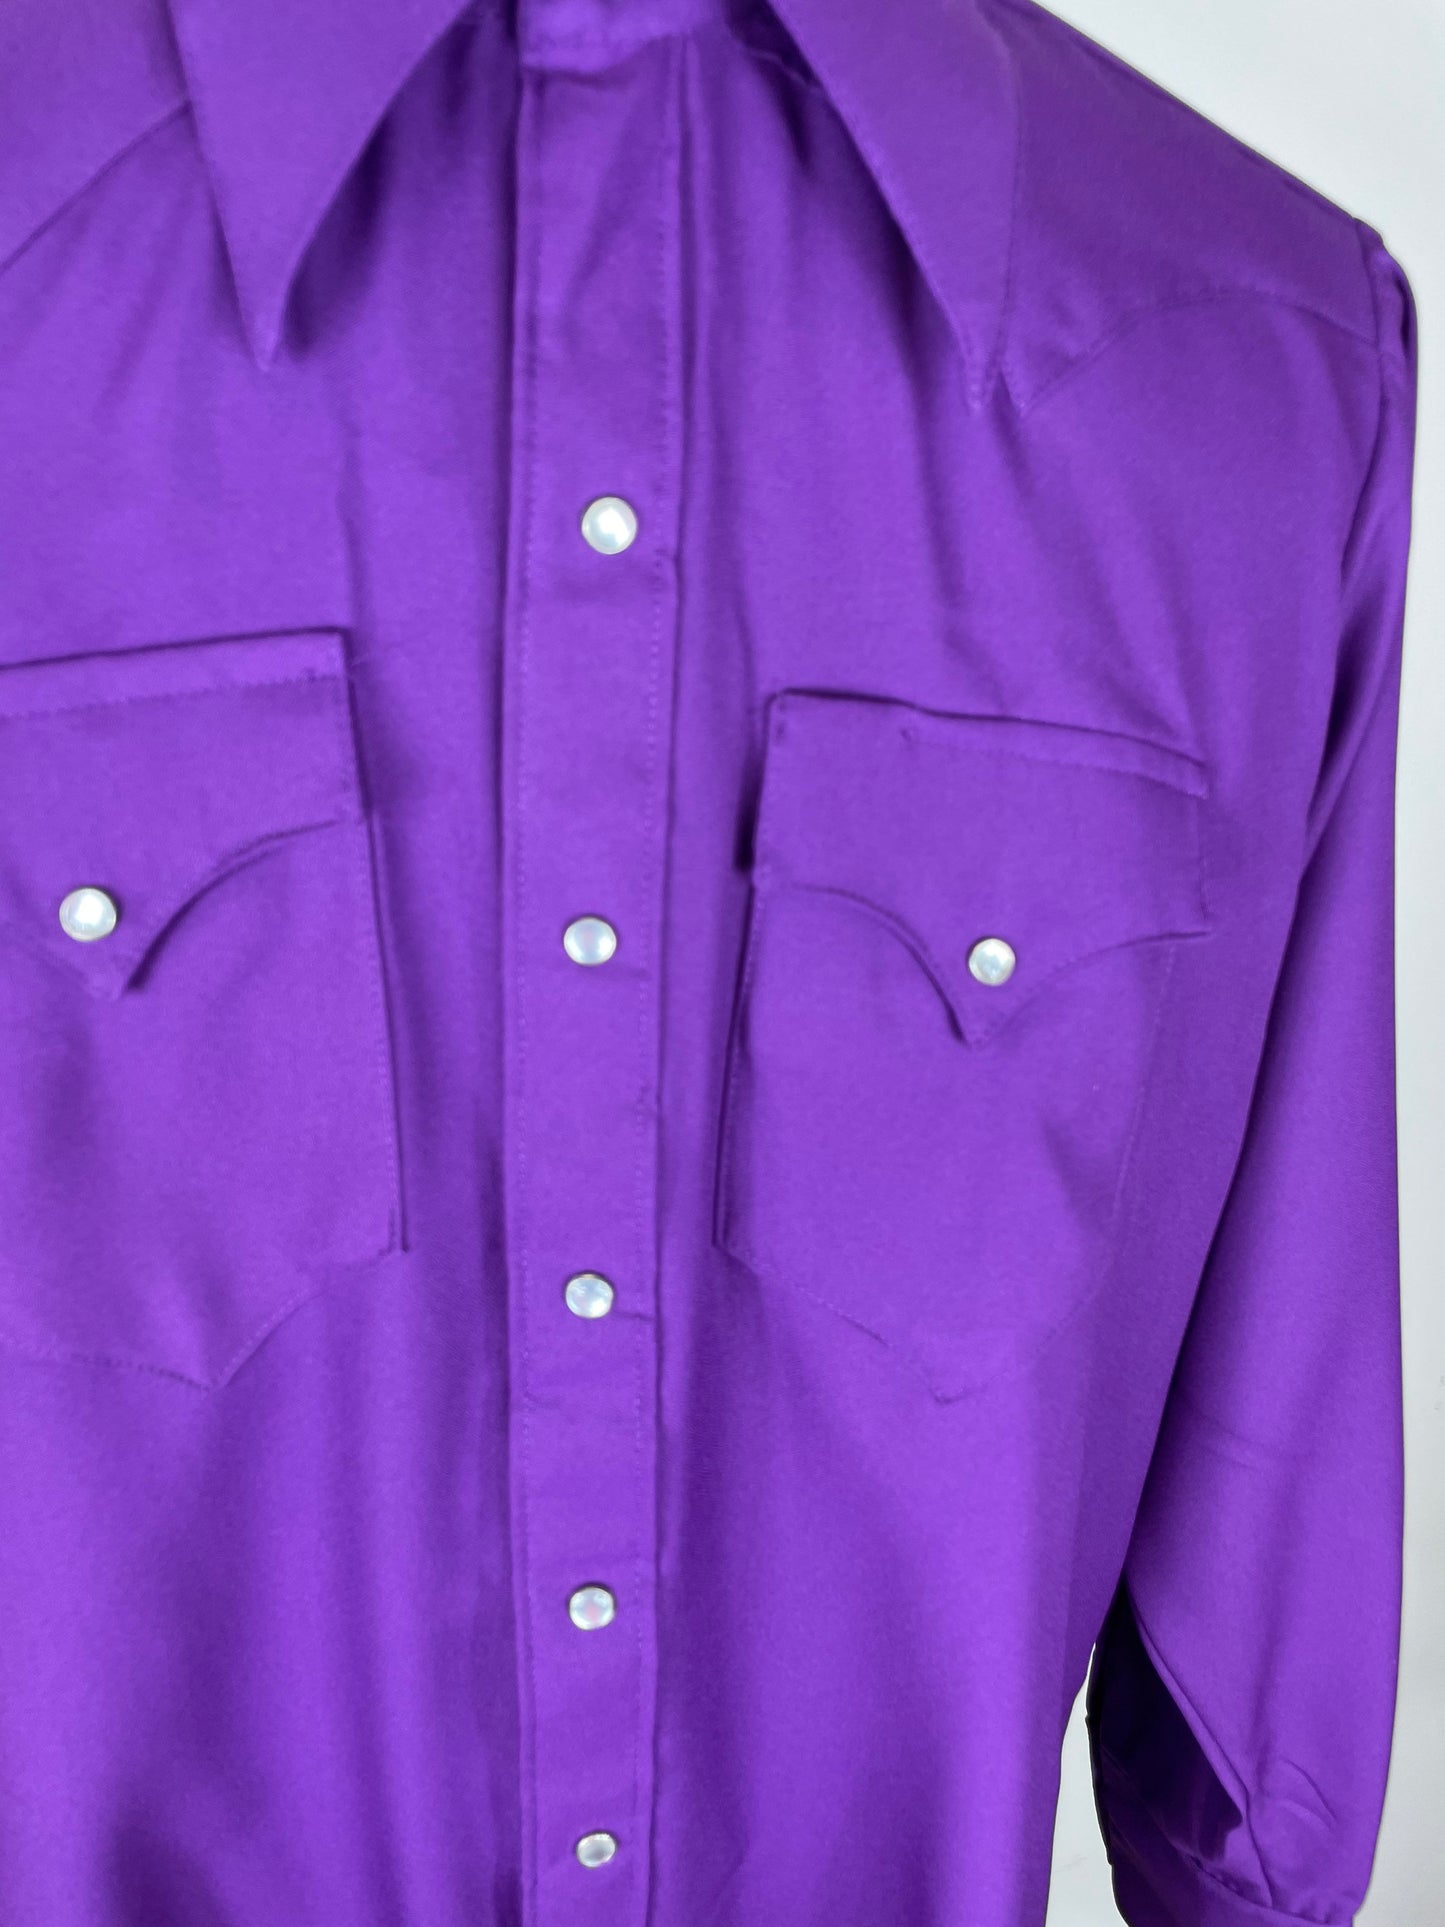 Vintage western shirt purple with pearl snaps by Rockmount Ranchwear Size L/XL